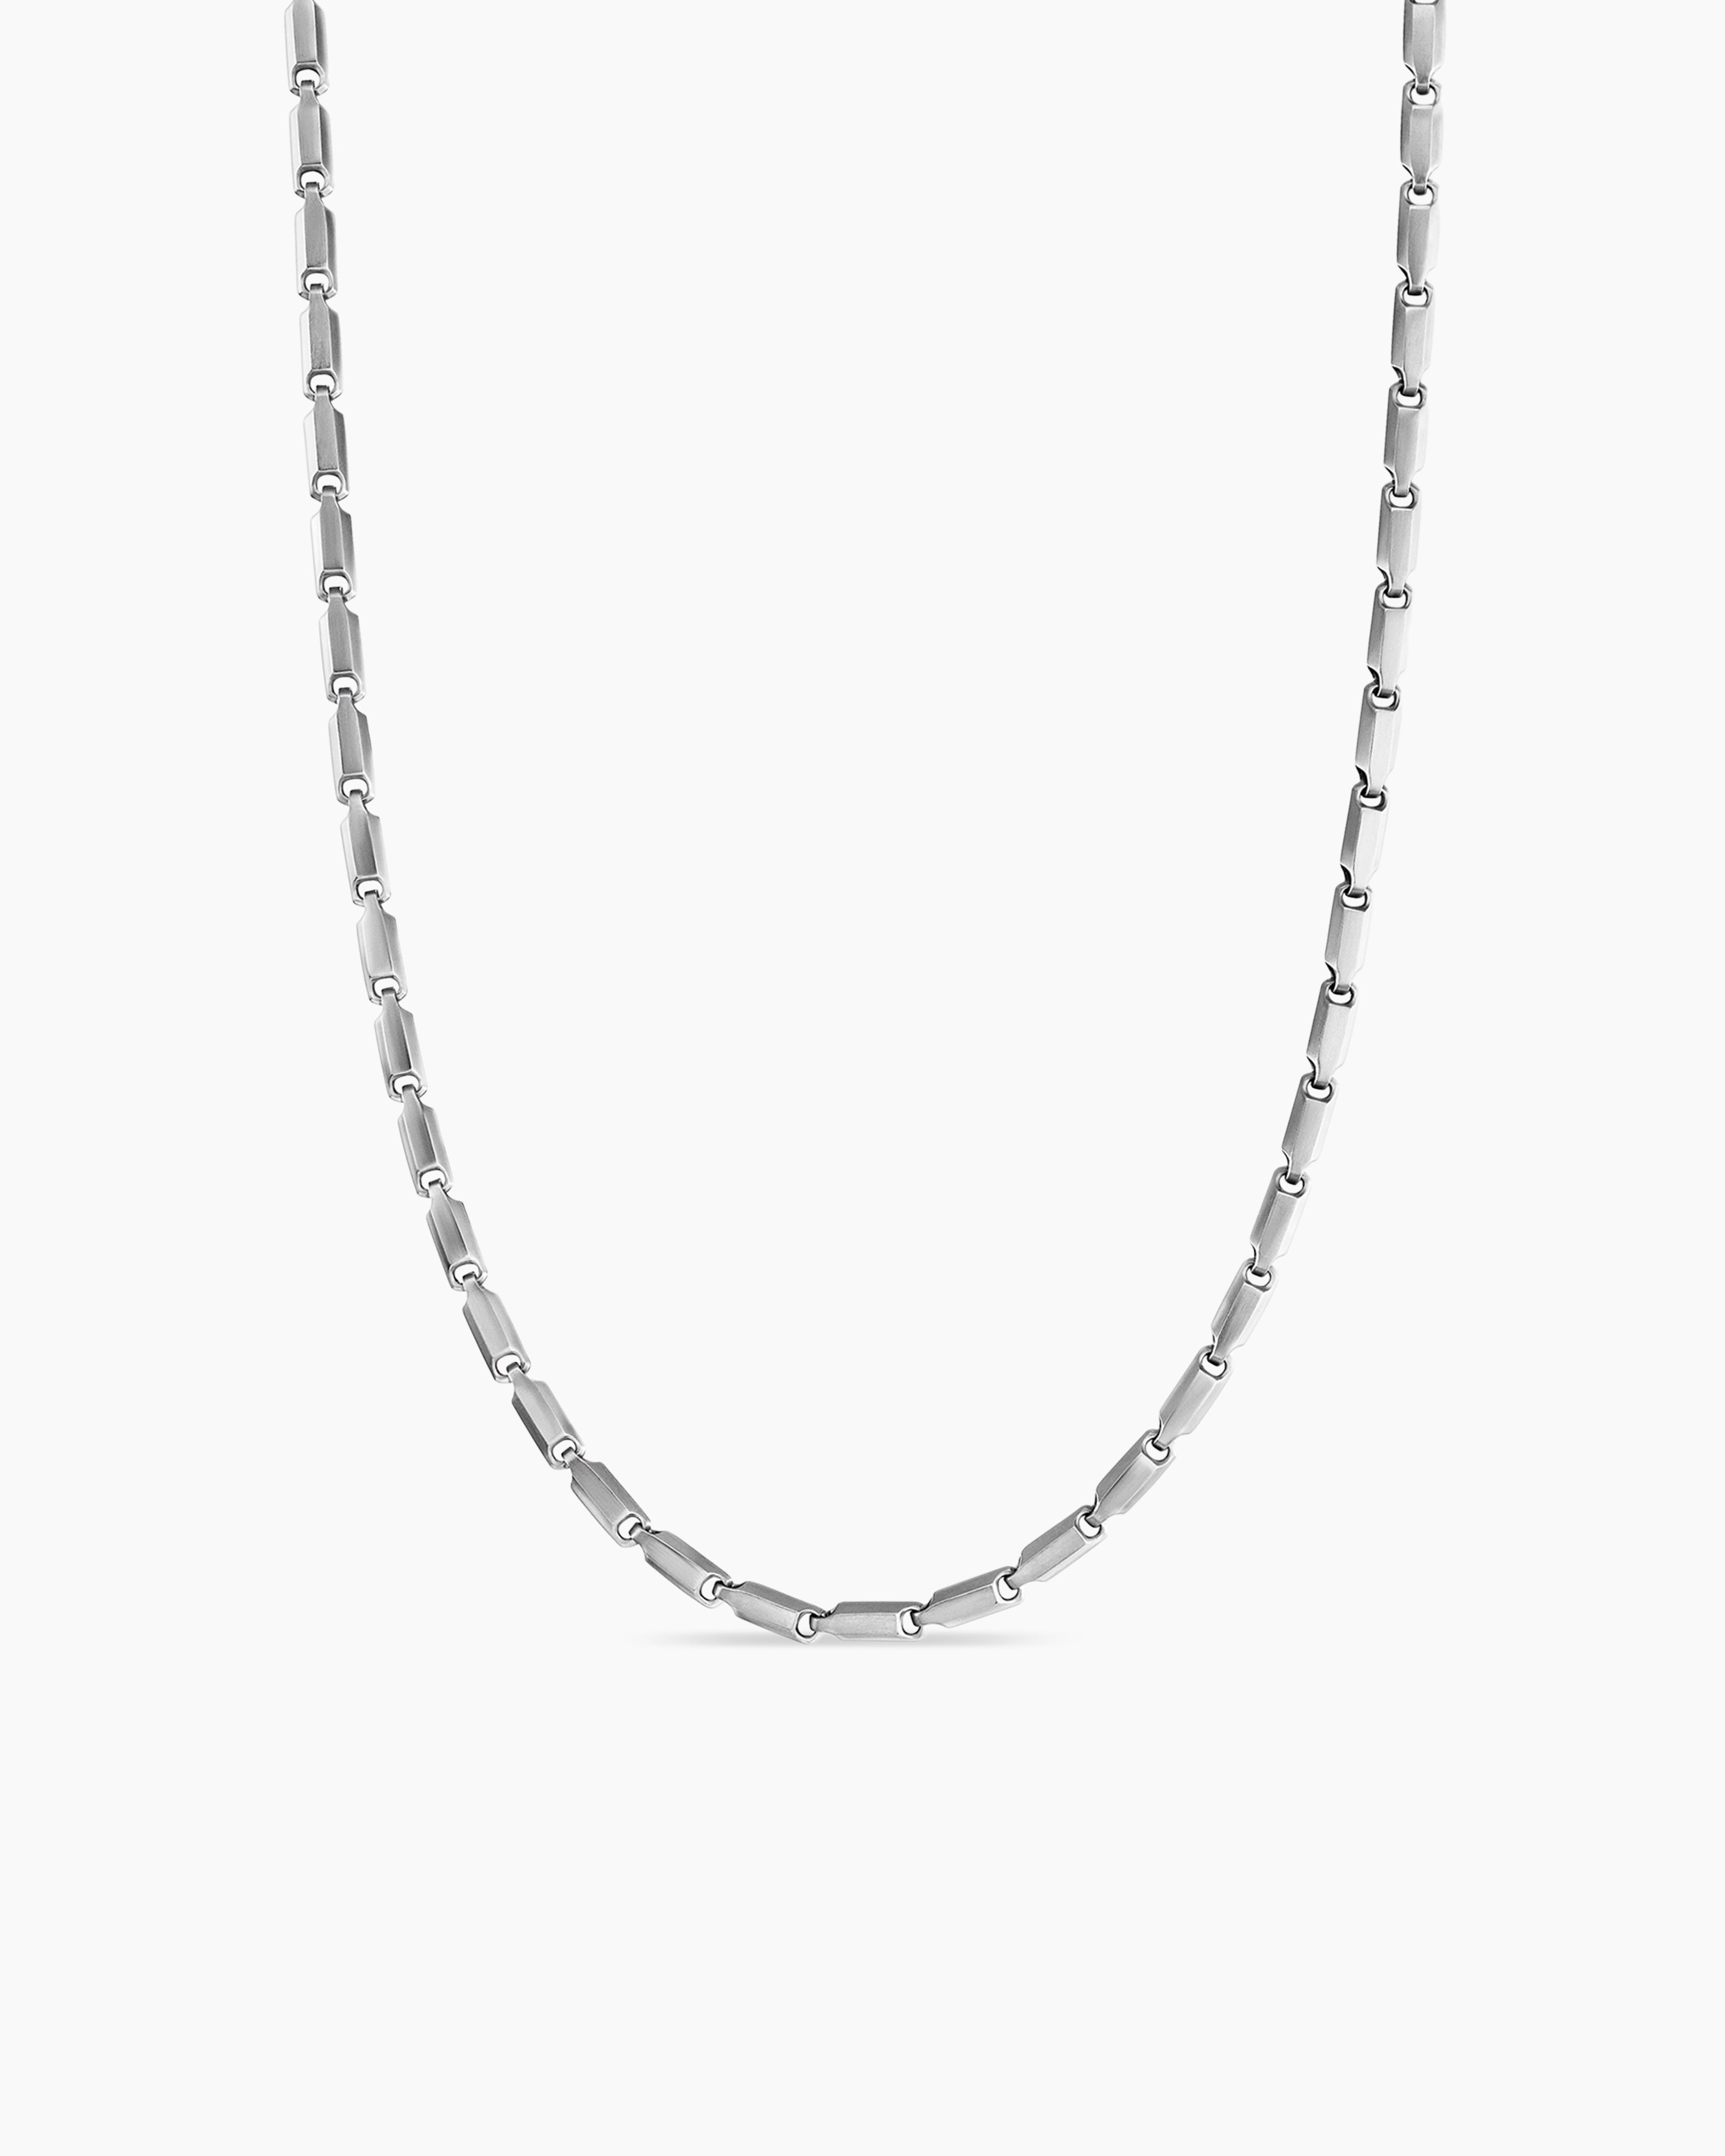 Yurman Sterling Faceted 3mm in Silver, | David Link Necklace